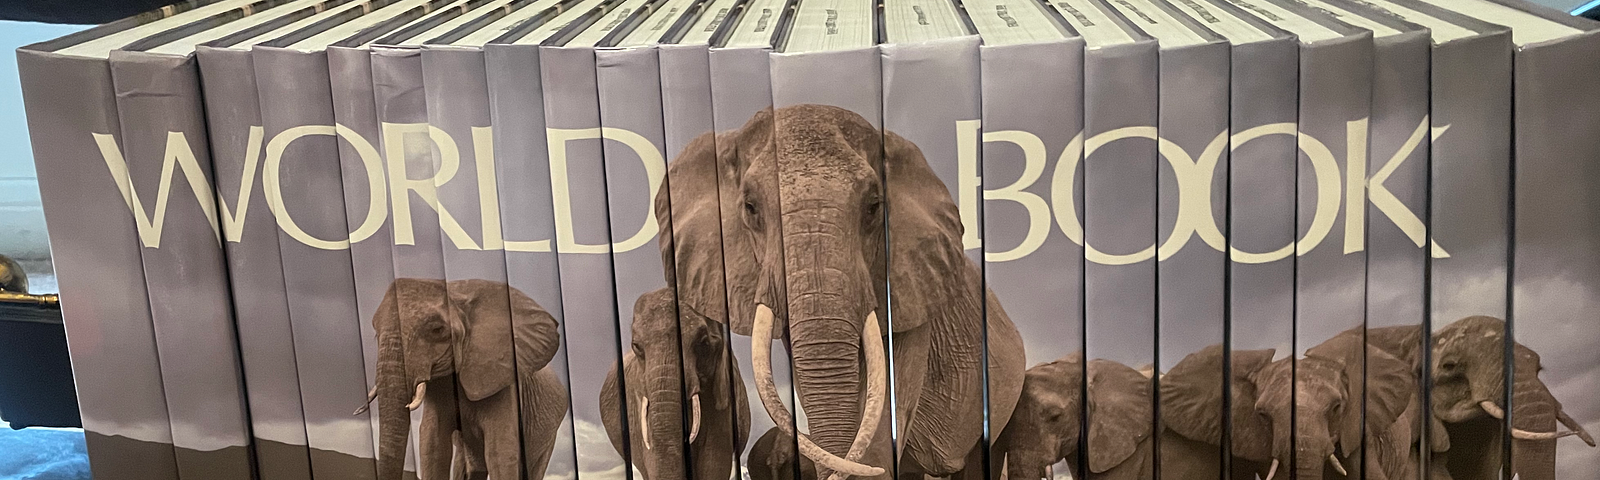 Complete set of the 2020 World Book Encyclopedia. The spines across the 22 volumes make a picture of elephants sanding in a field with a turquoise sky. The brand name World Book is spelled out in white letters across the tops of the spines.